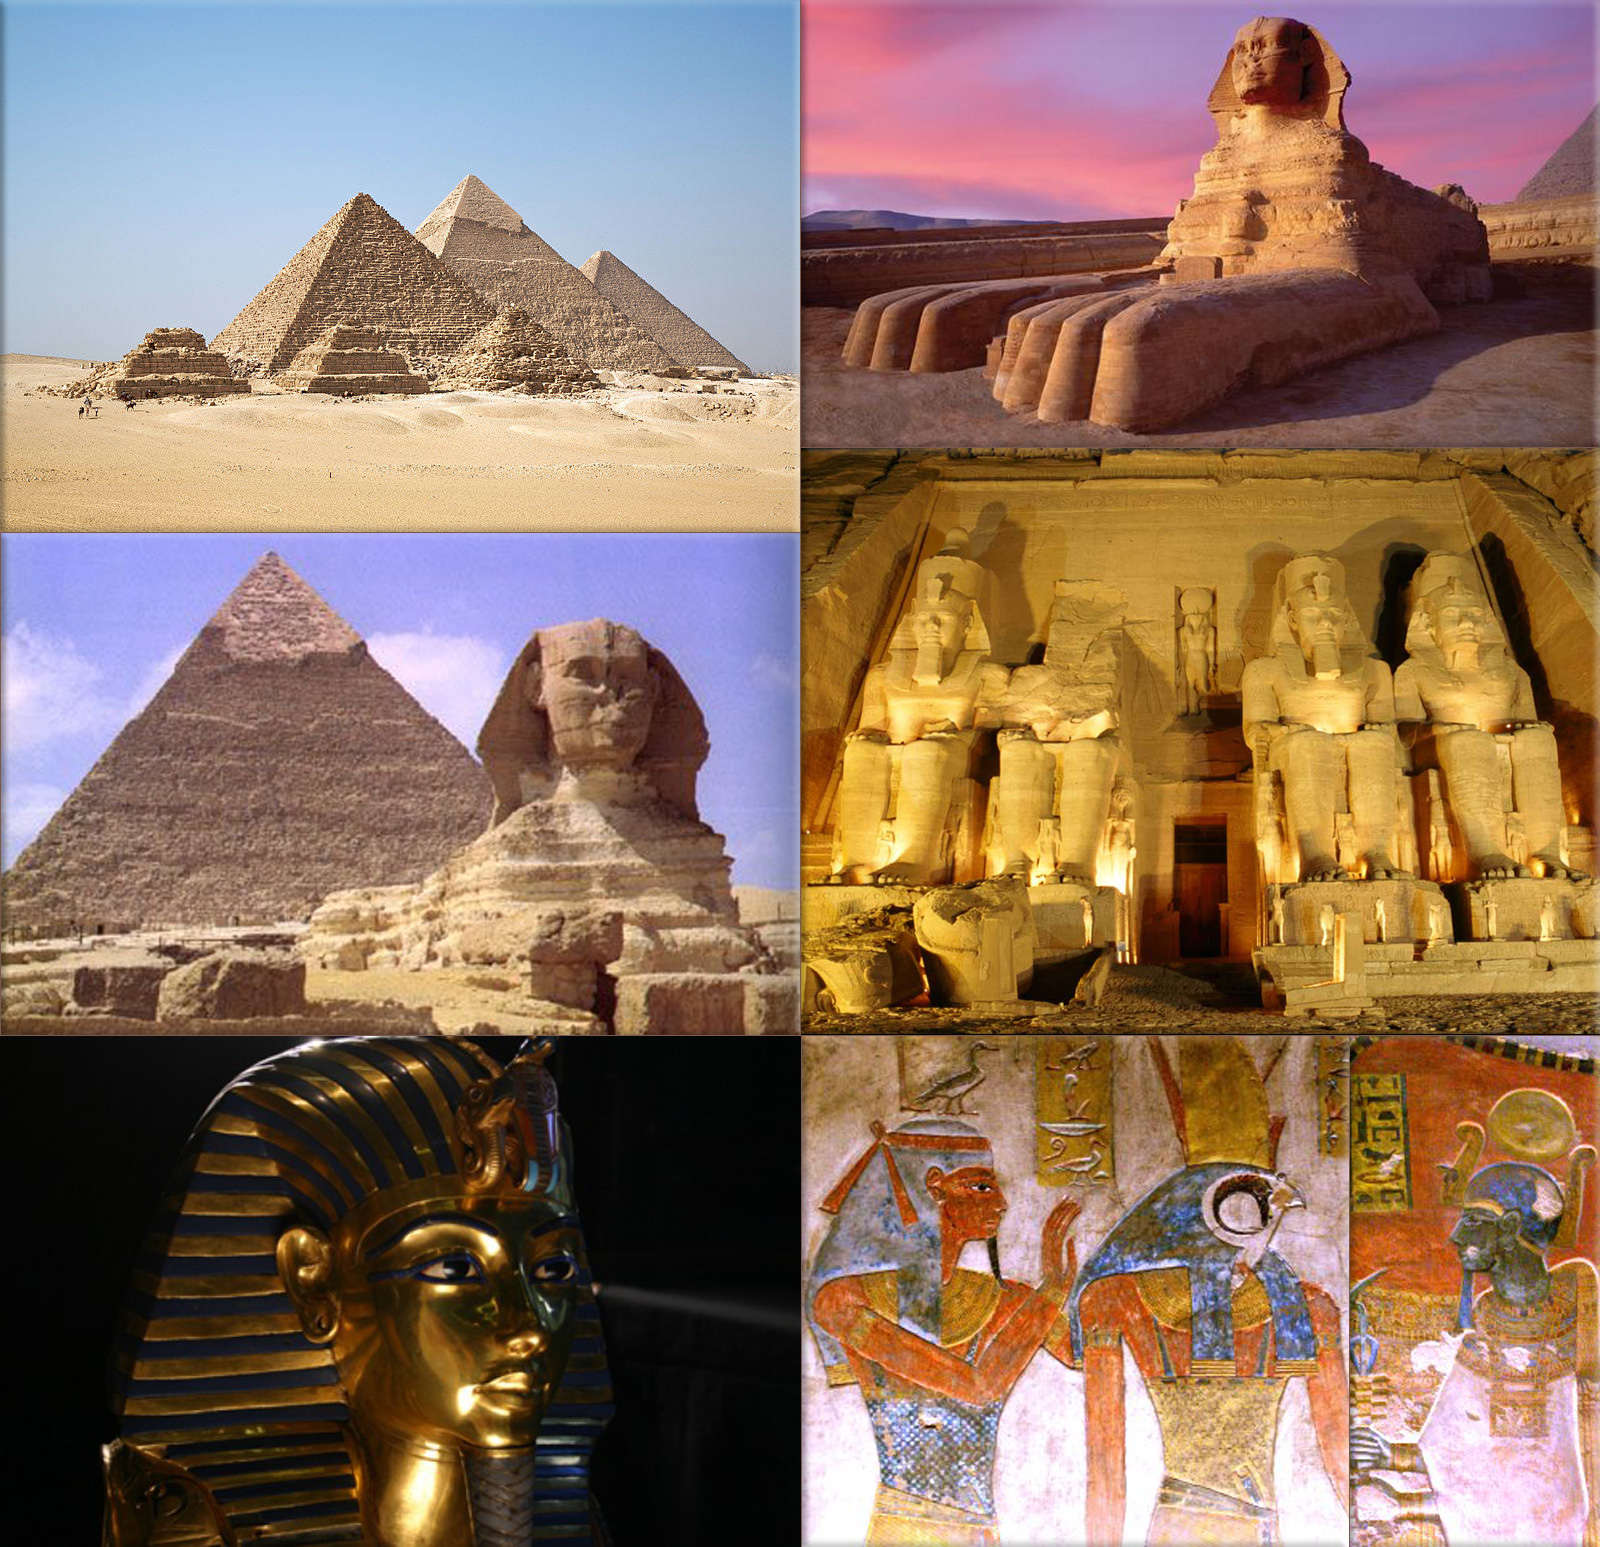 Ancient Egypt: Giza Pyramids ● Great Sphinx ● Abu Simbel Temples ● Egyptian King Tutankhamun  ● Beautiful images of Egyptian gods and goddesses adorn tomb walls in the Valley of the Kings - The god Ptah, a creator deity, in the tomb of Ramesses III 	● Abu Simbel Egypt